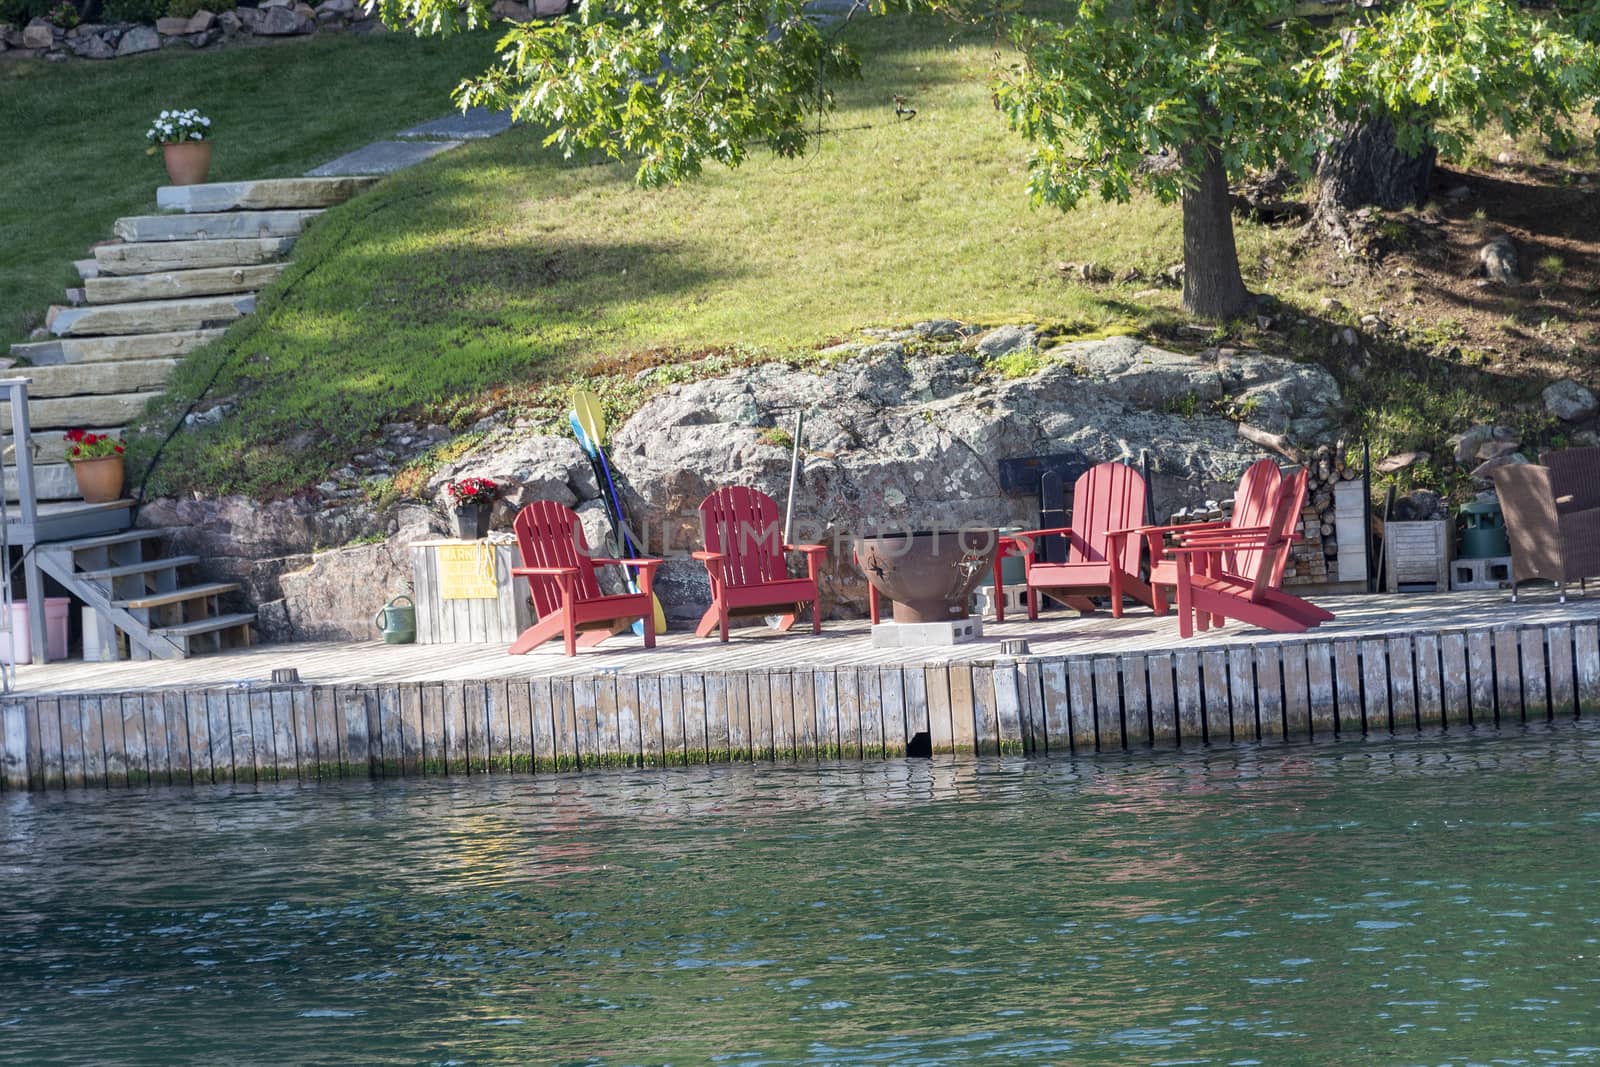 Chairs are arranged and a barbecue is set on the rocks and prepared for a picnic on a wooden pier